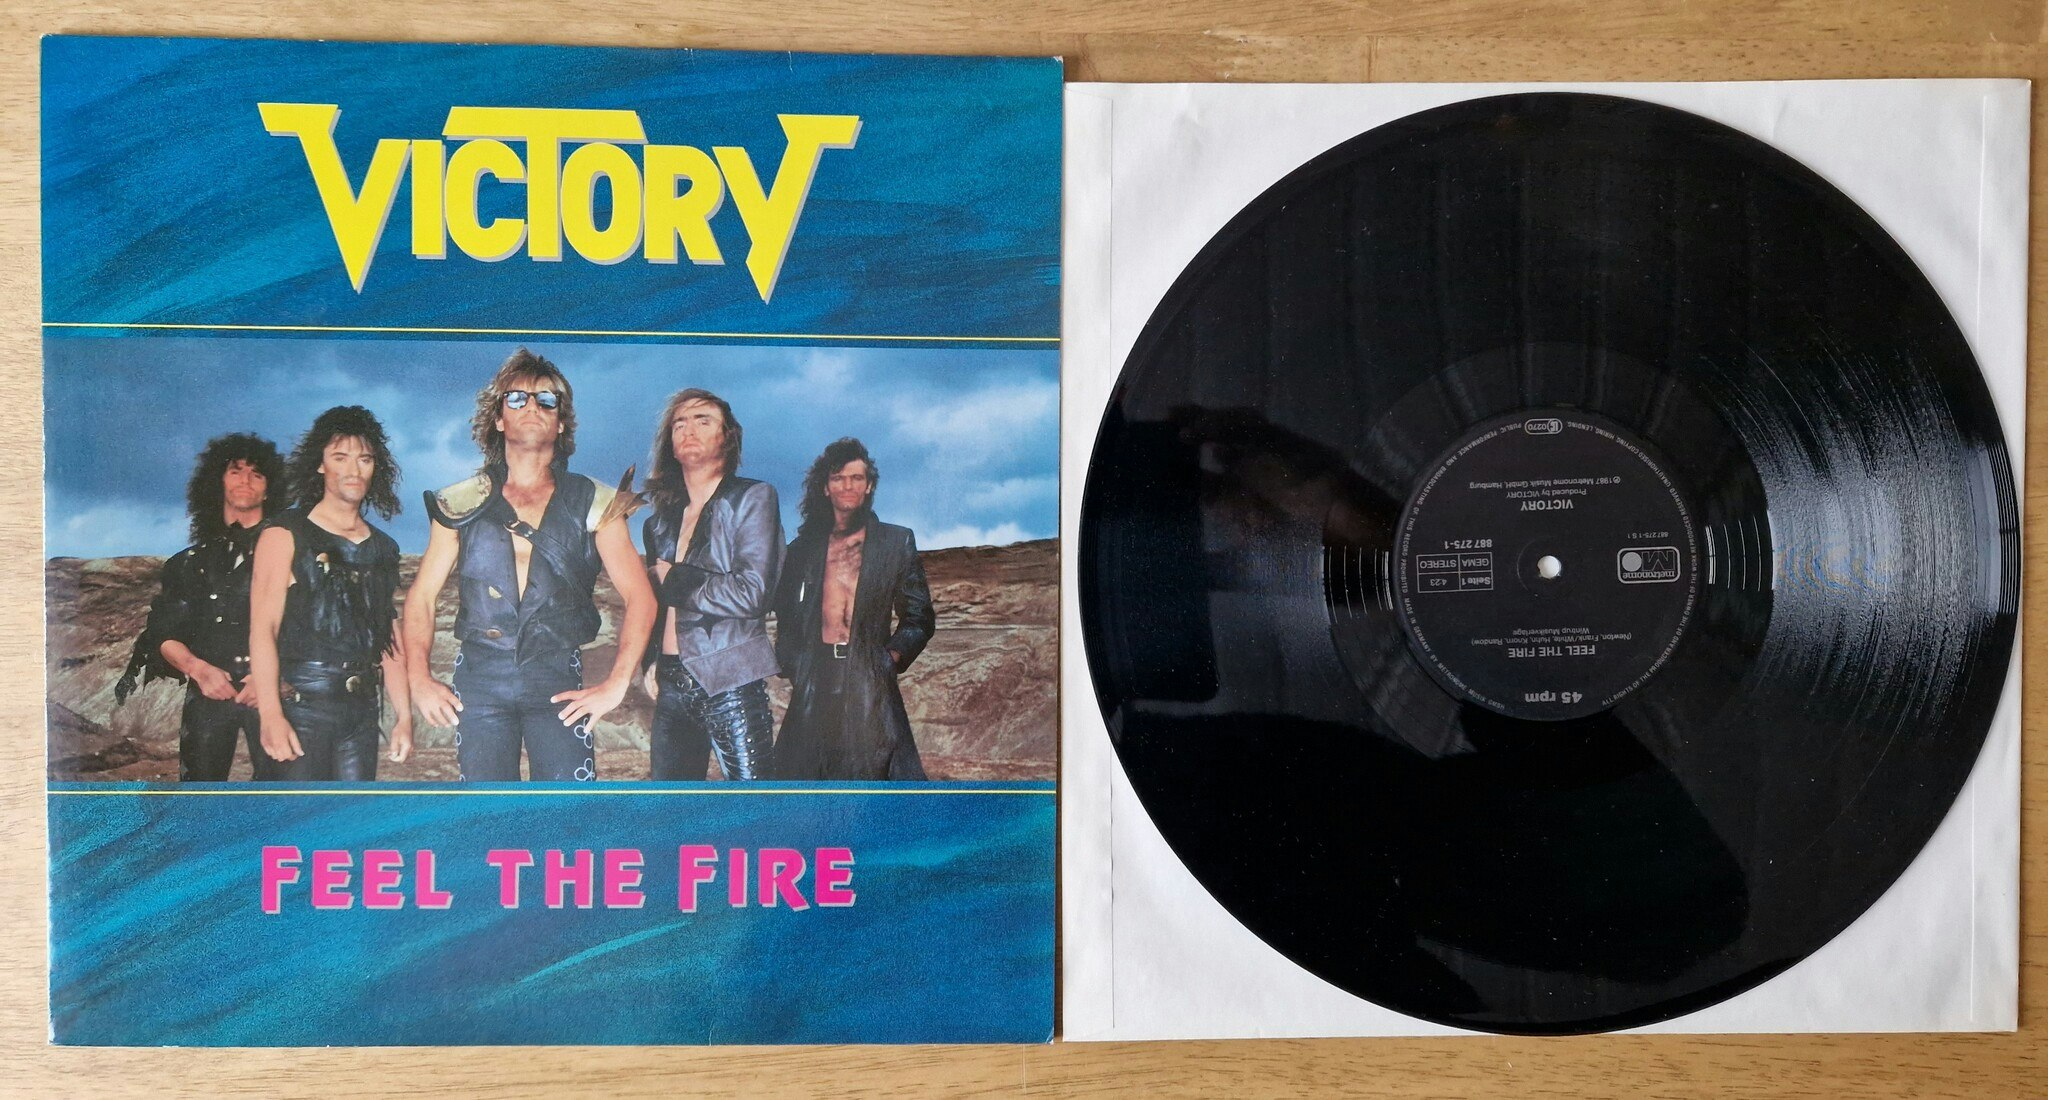 Victory, Feel the fire. Vinyl S 12"